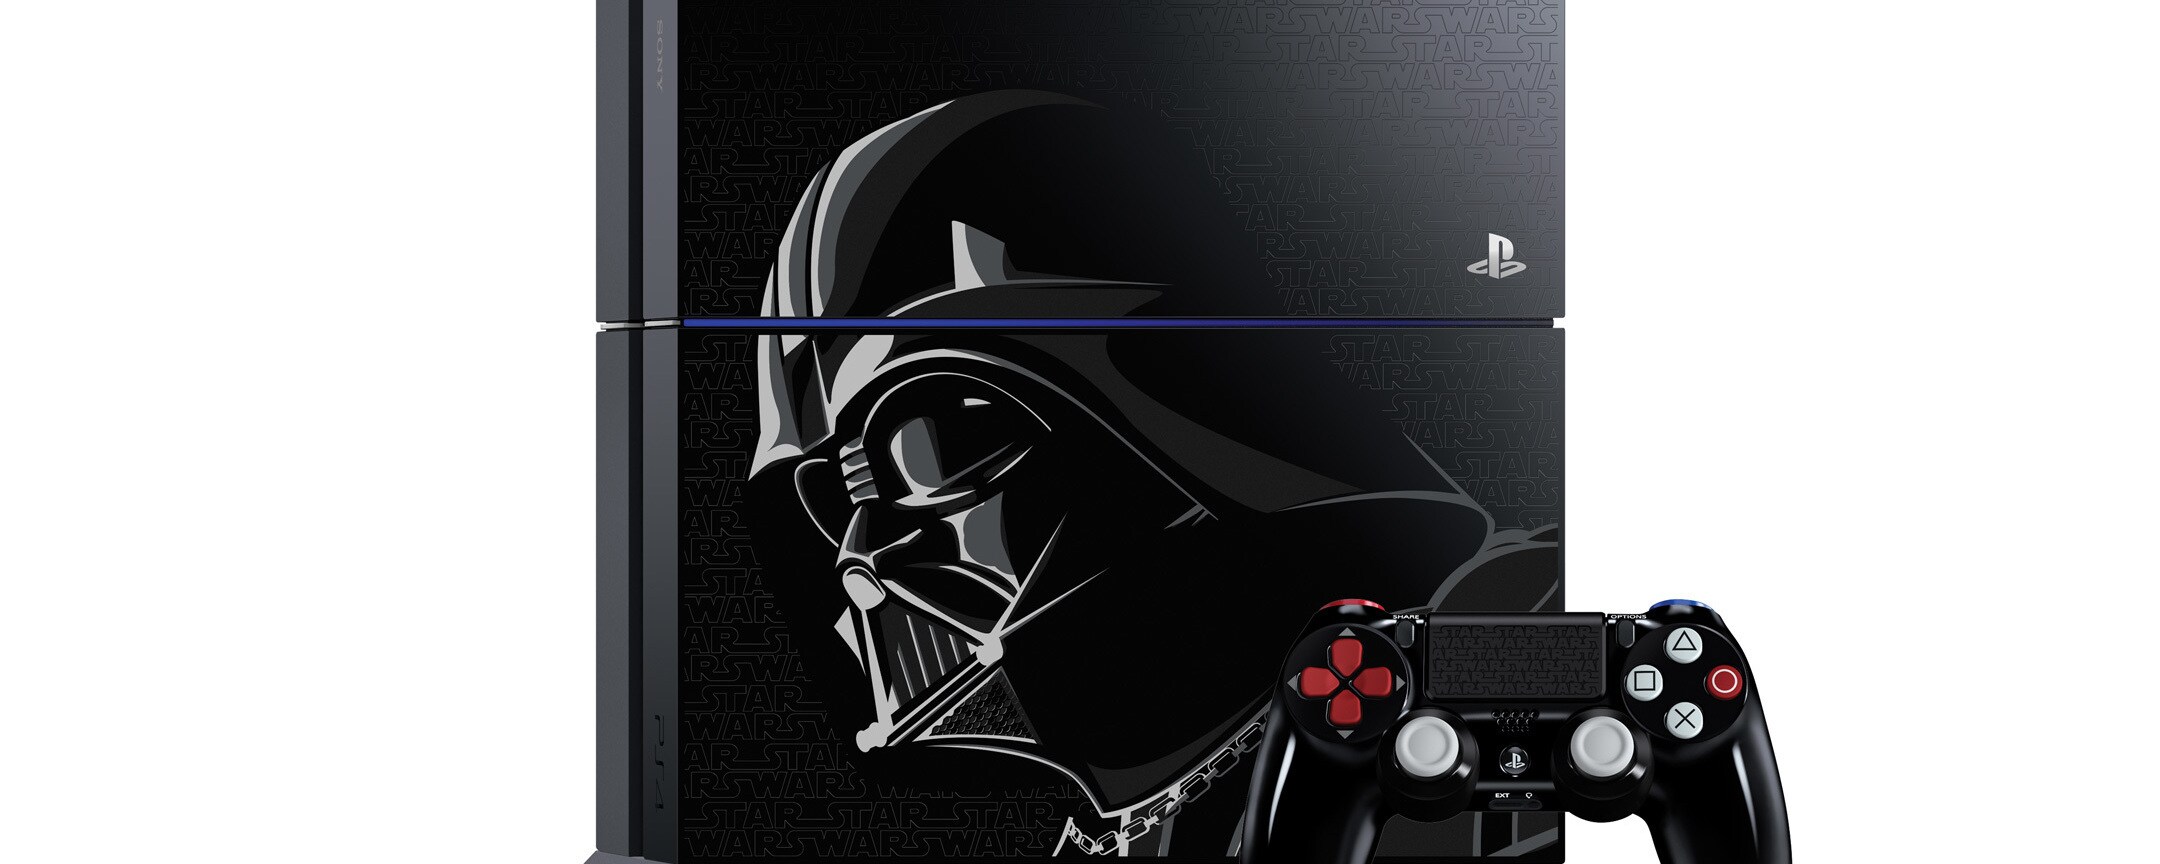 Limited Edition Darth PlayStation 4 Sweepstakes! |